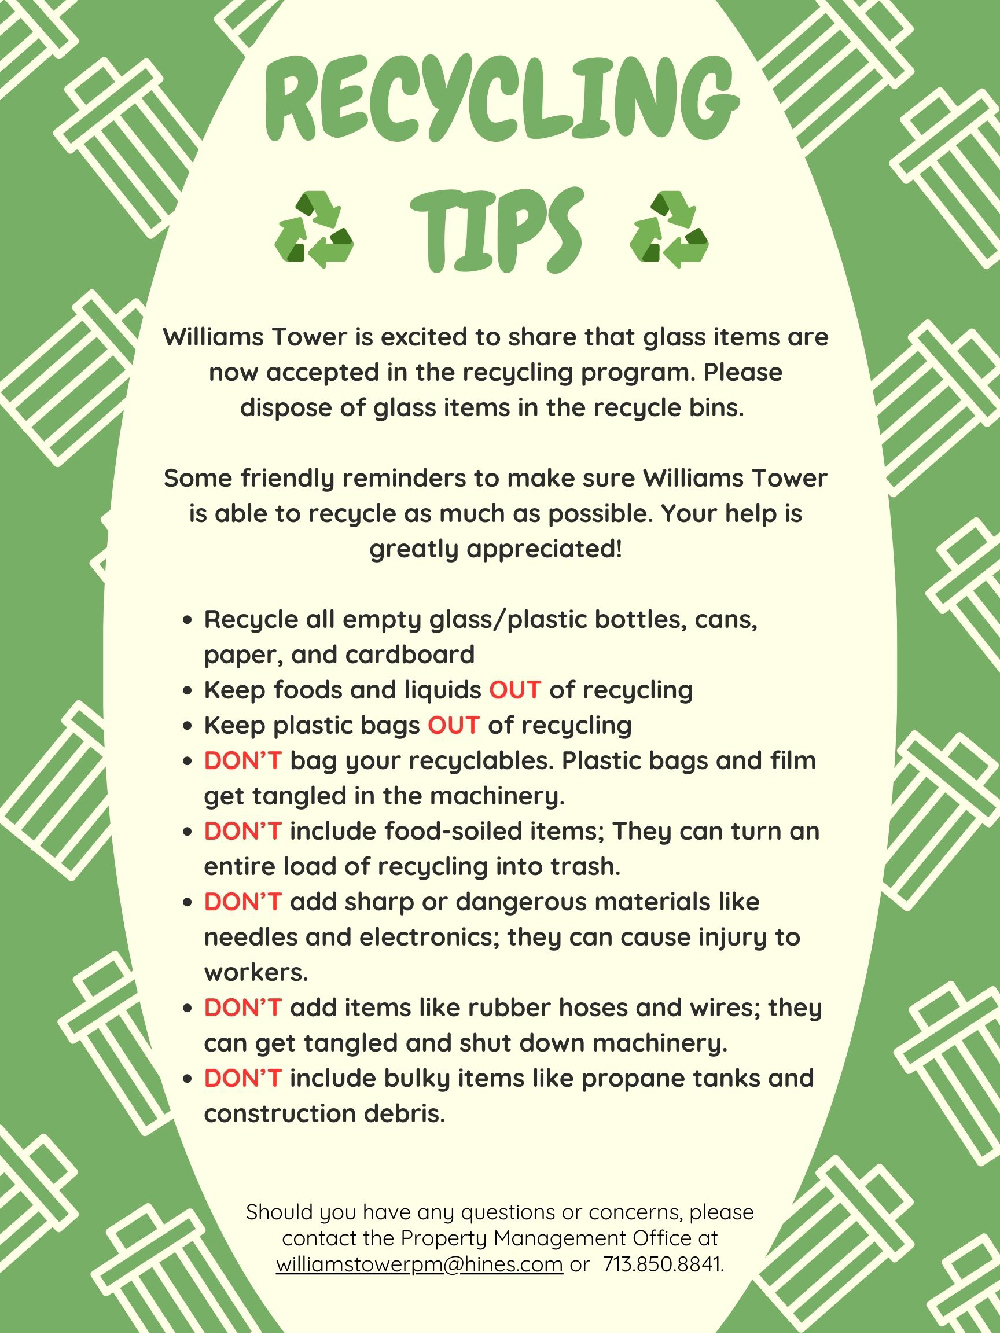 Recycling Tips Image